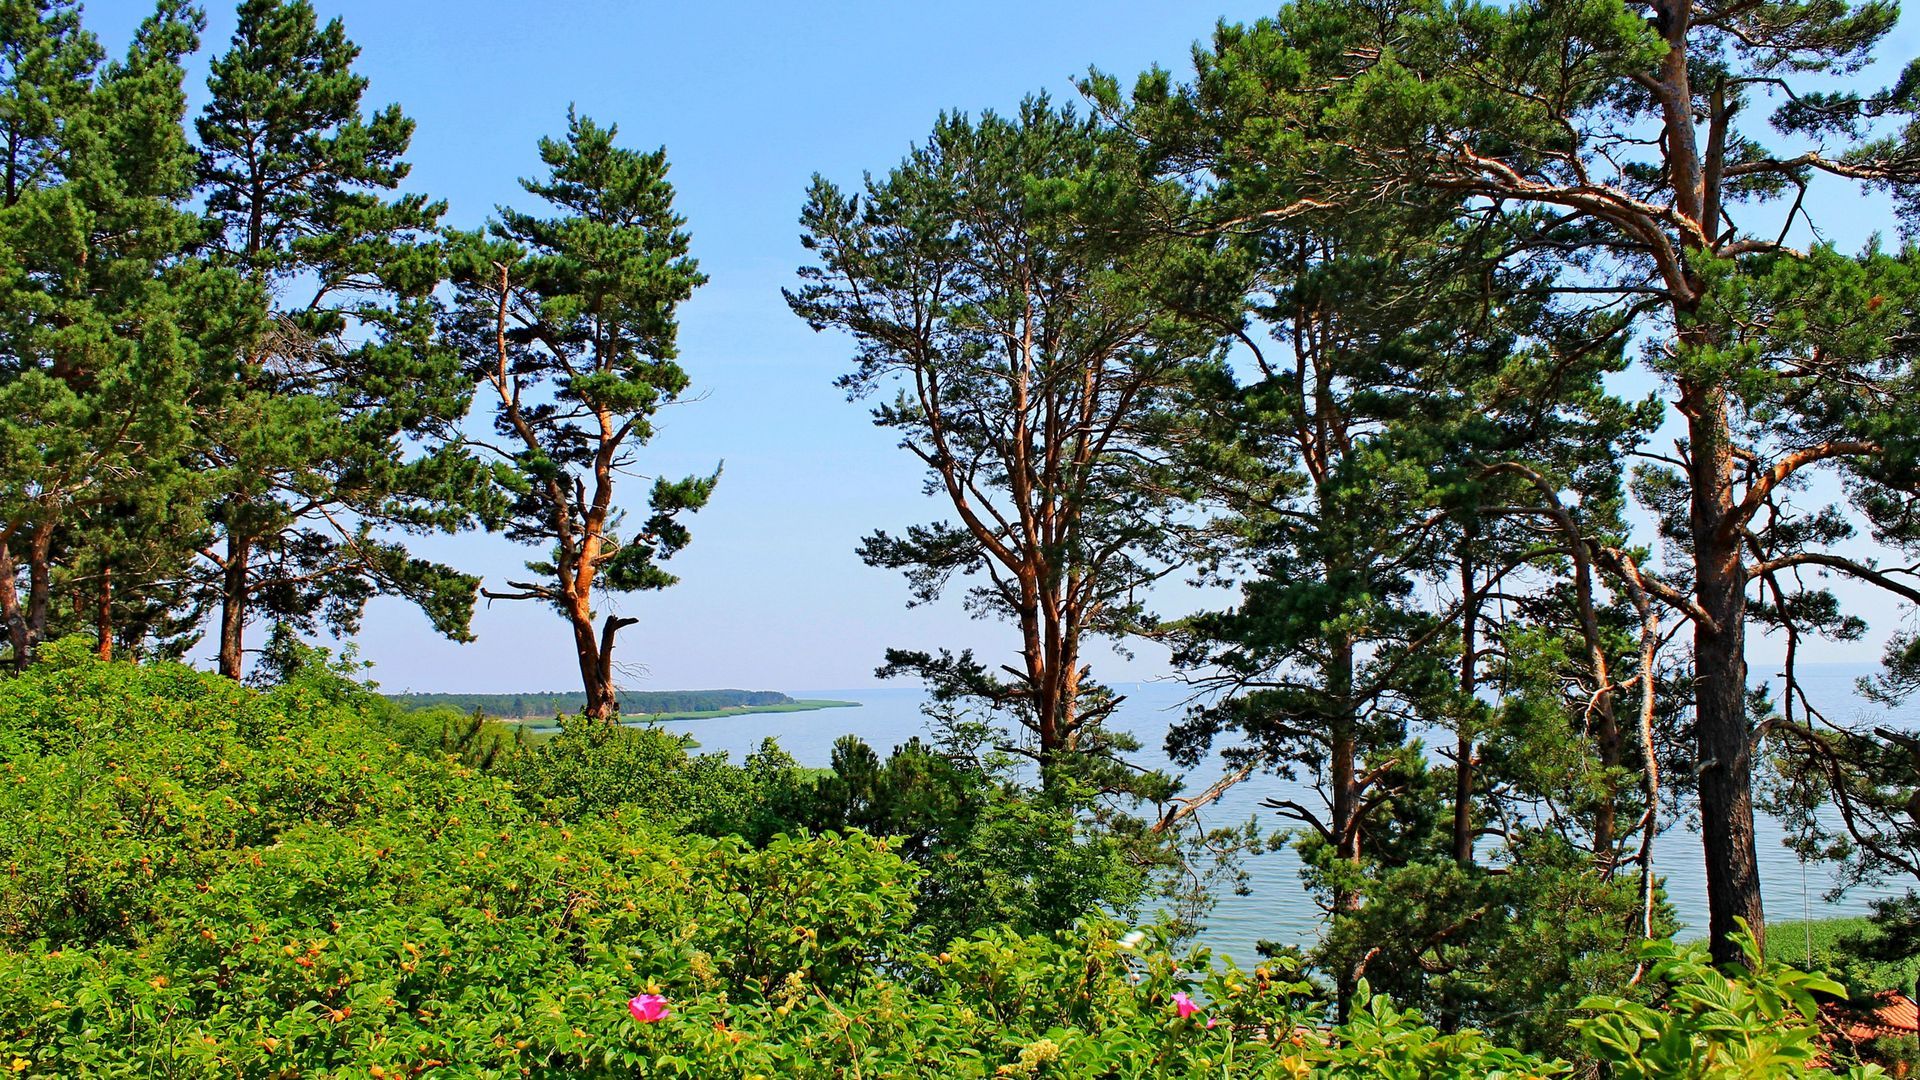 Download wallpaper 1920x1080 lithuania, trees, pine, hill, sea